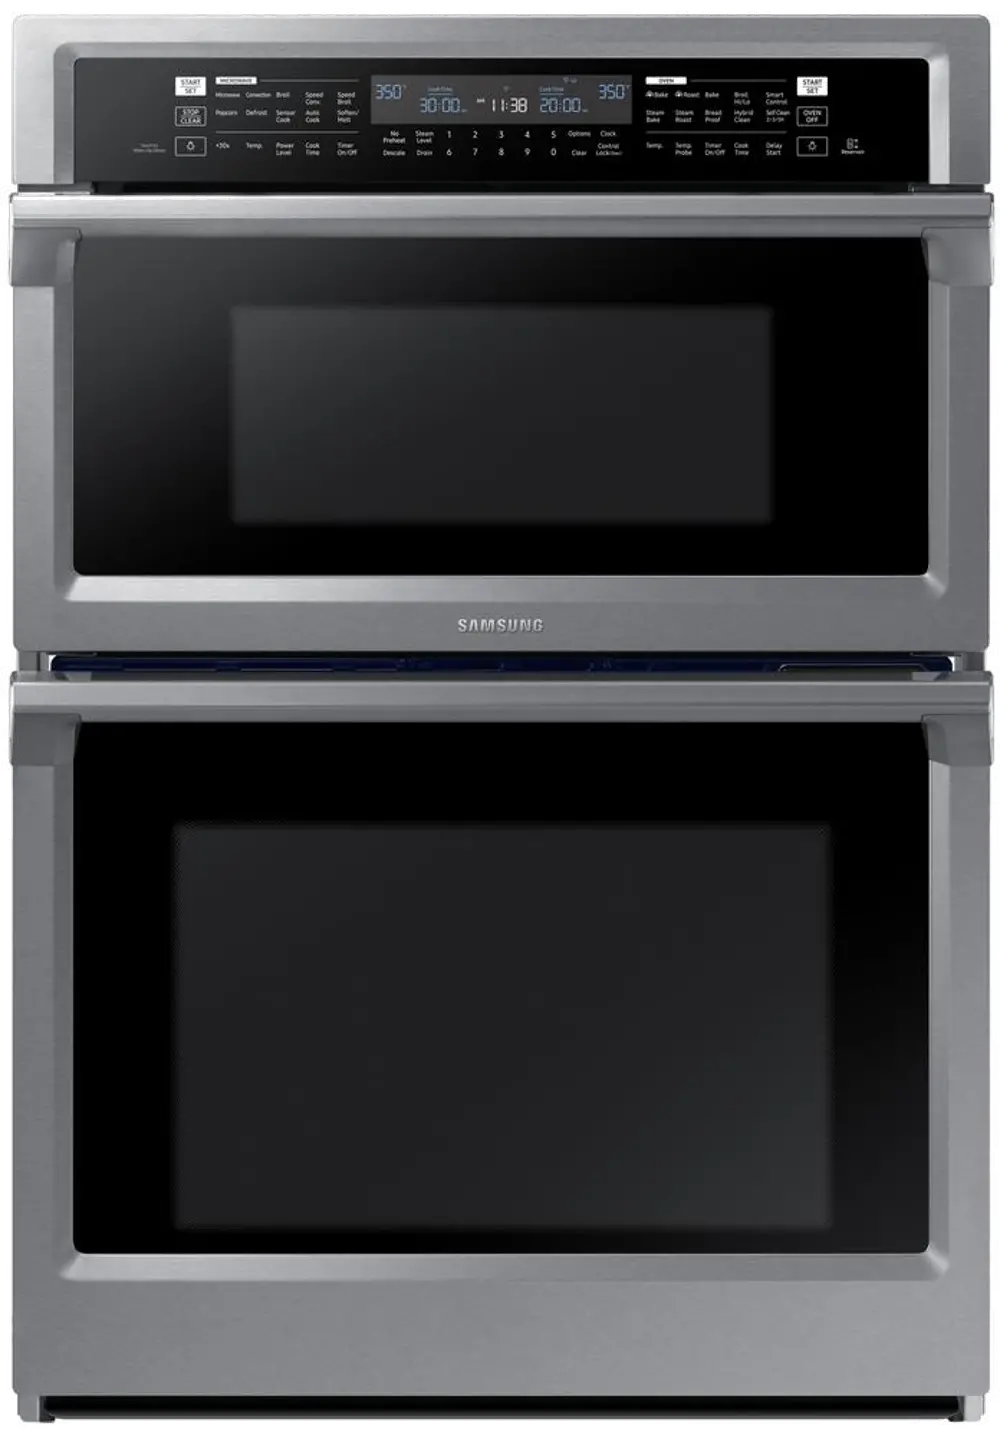 NQ70M6650DS Samsung 7 cu ft Combination Wall Oven - Stainless Steel 30 Inch-1